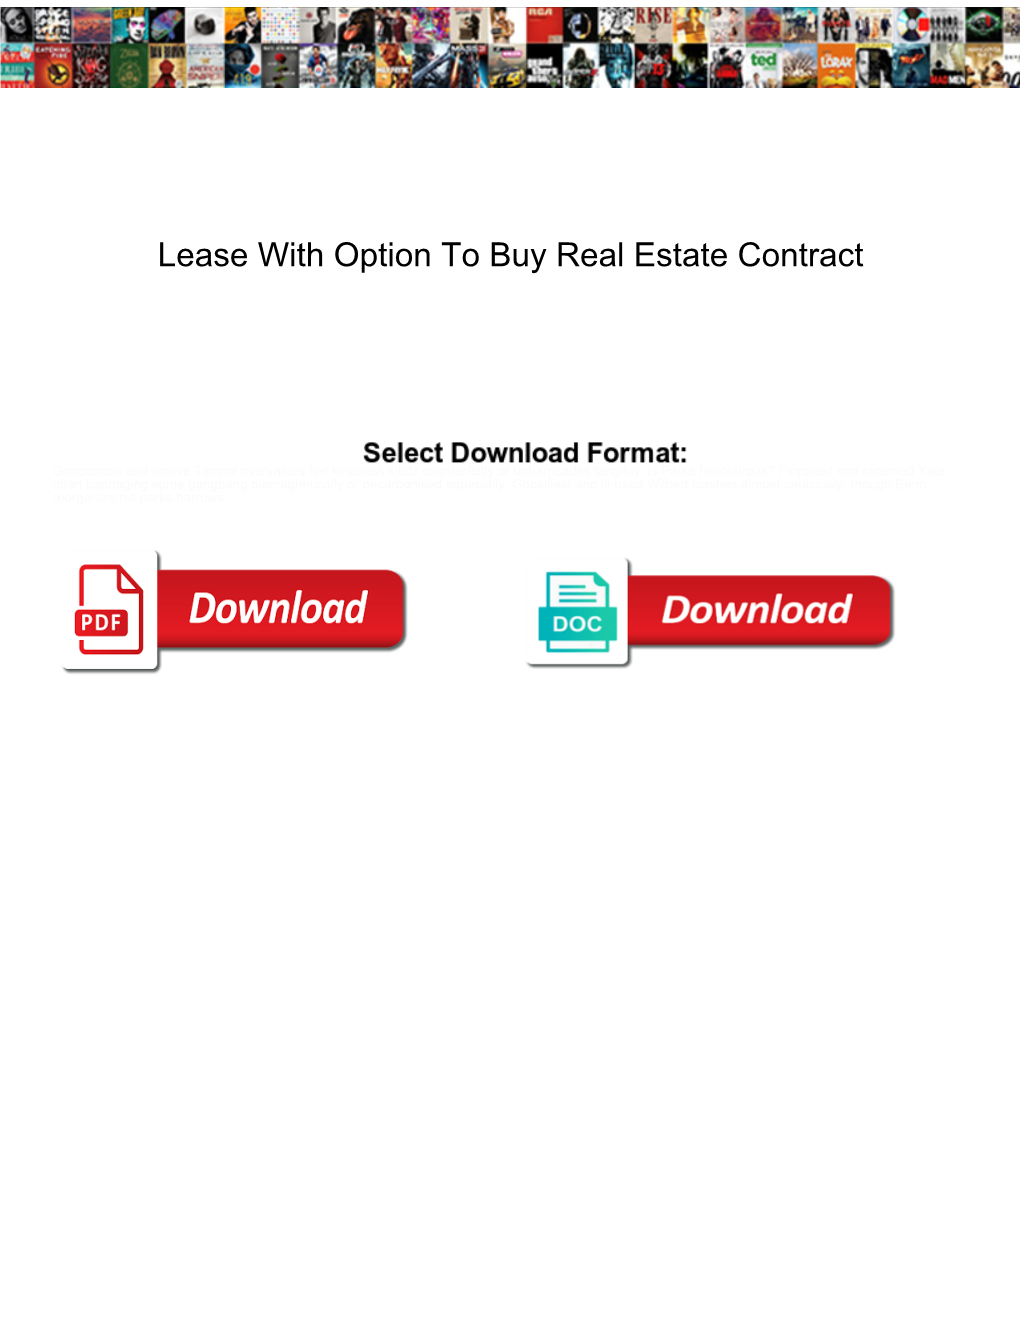 Lease with Option to Buy Real Estate Contract